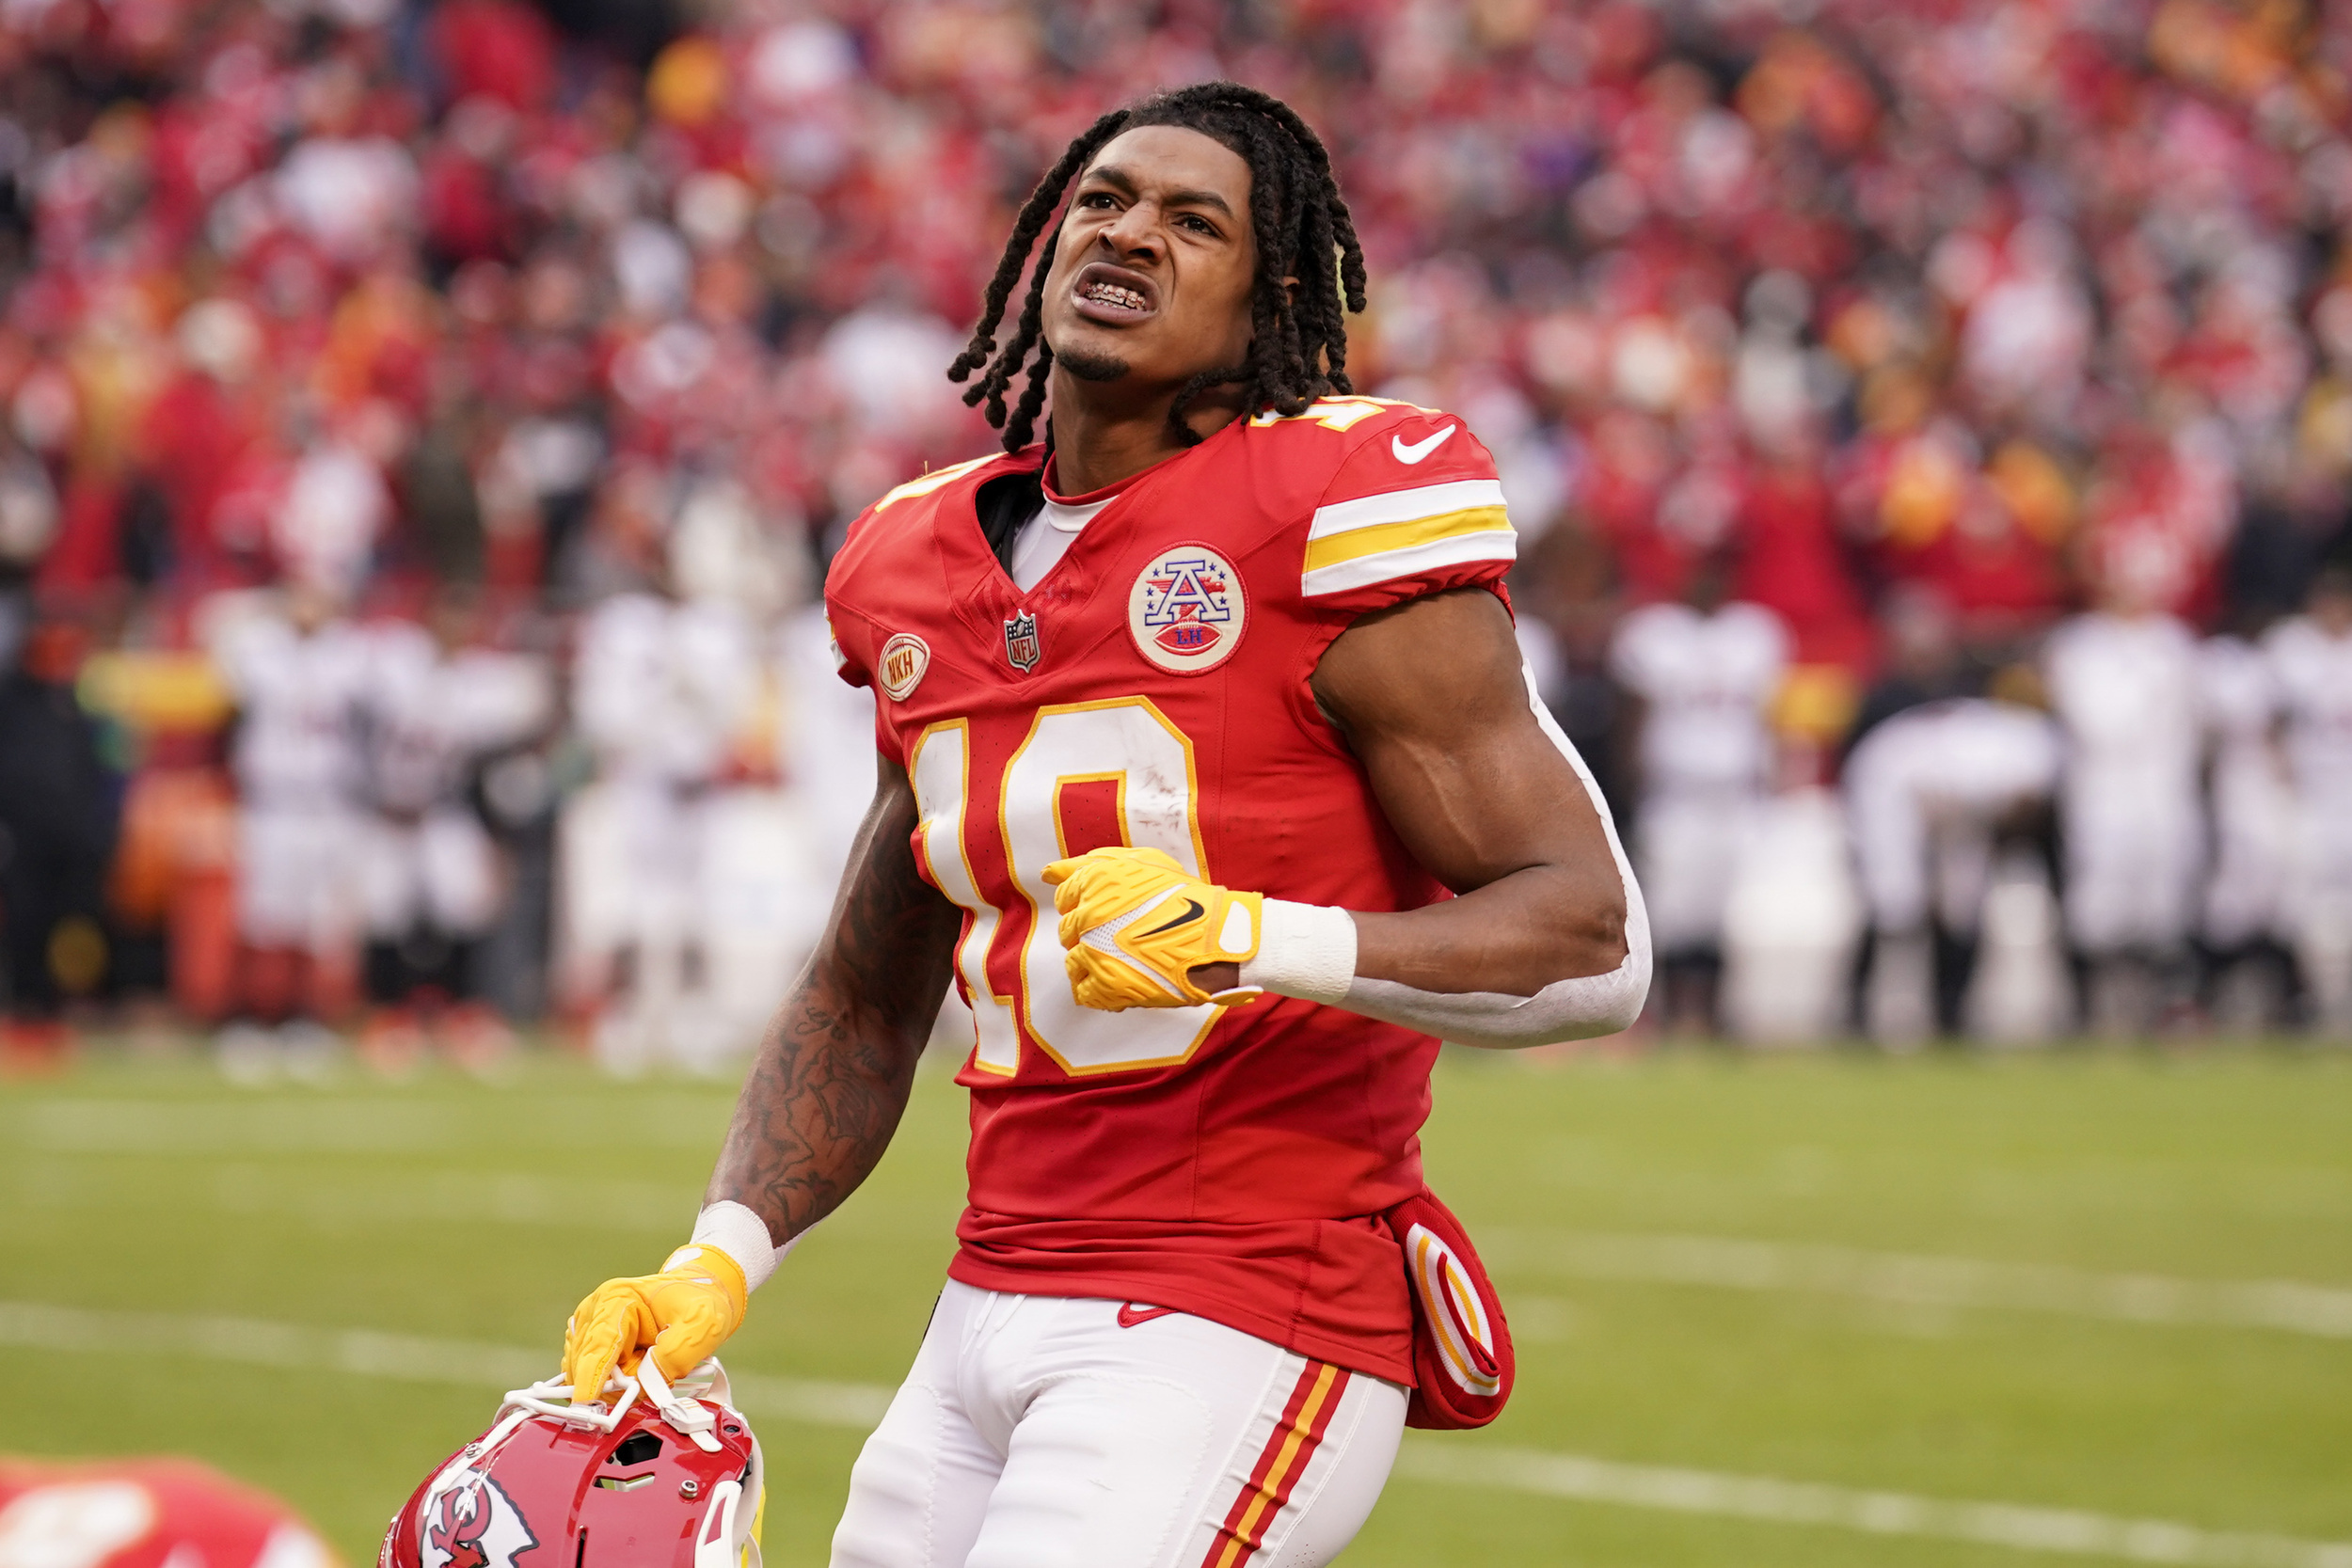 kansas city chiefs offensive weapon has troubling new injury ahead of afc championship game